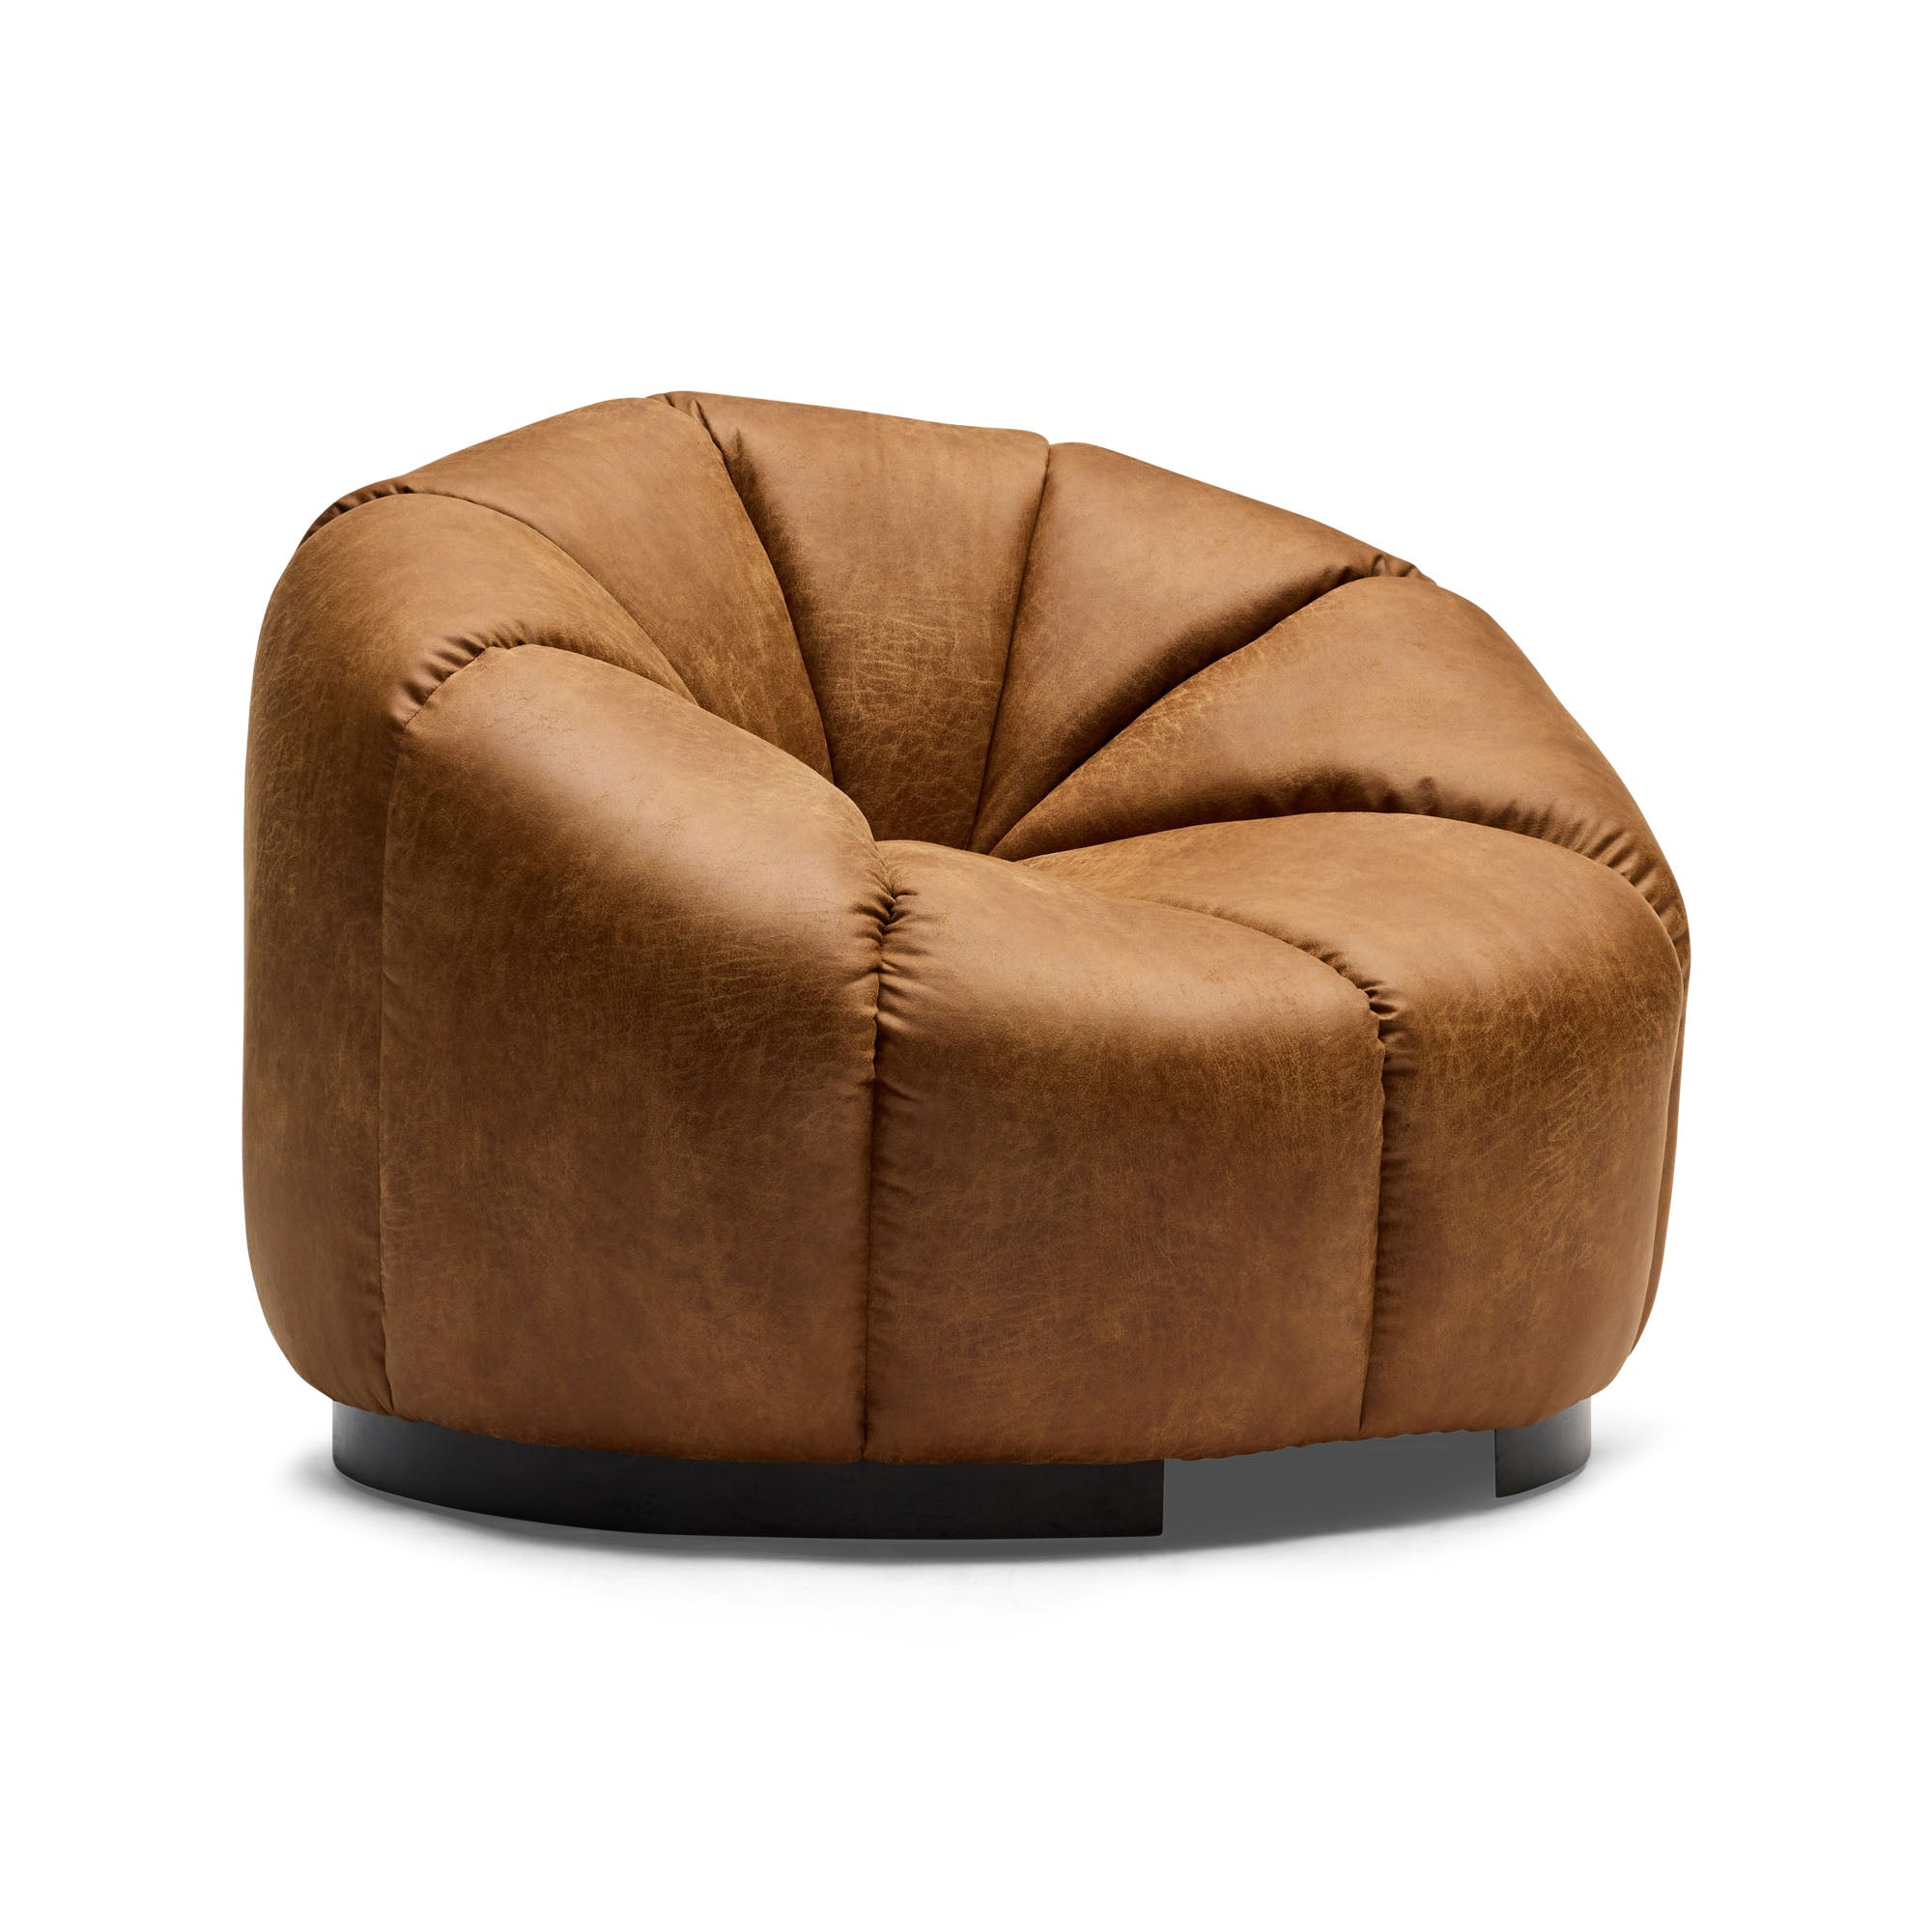 Modena Occasional Chair Cognac Leather Sample